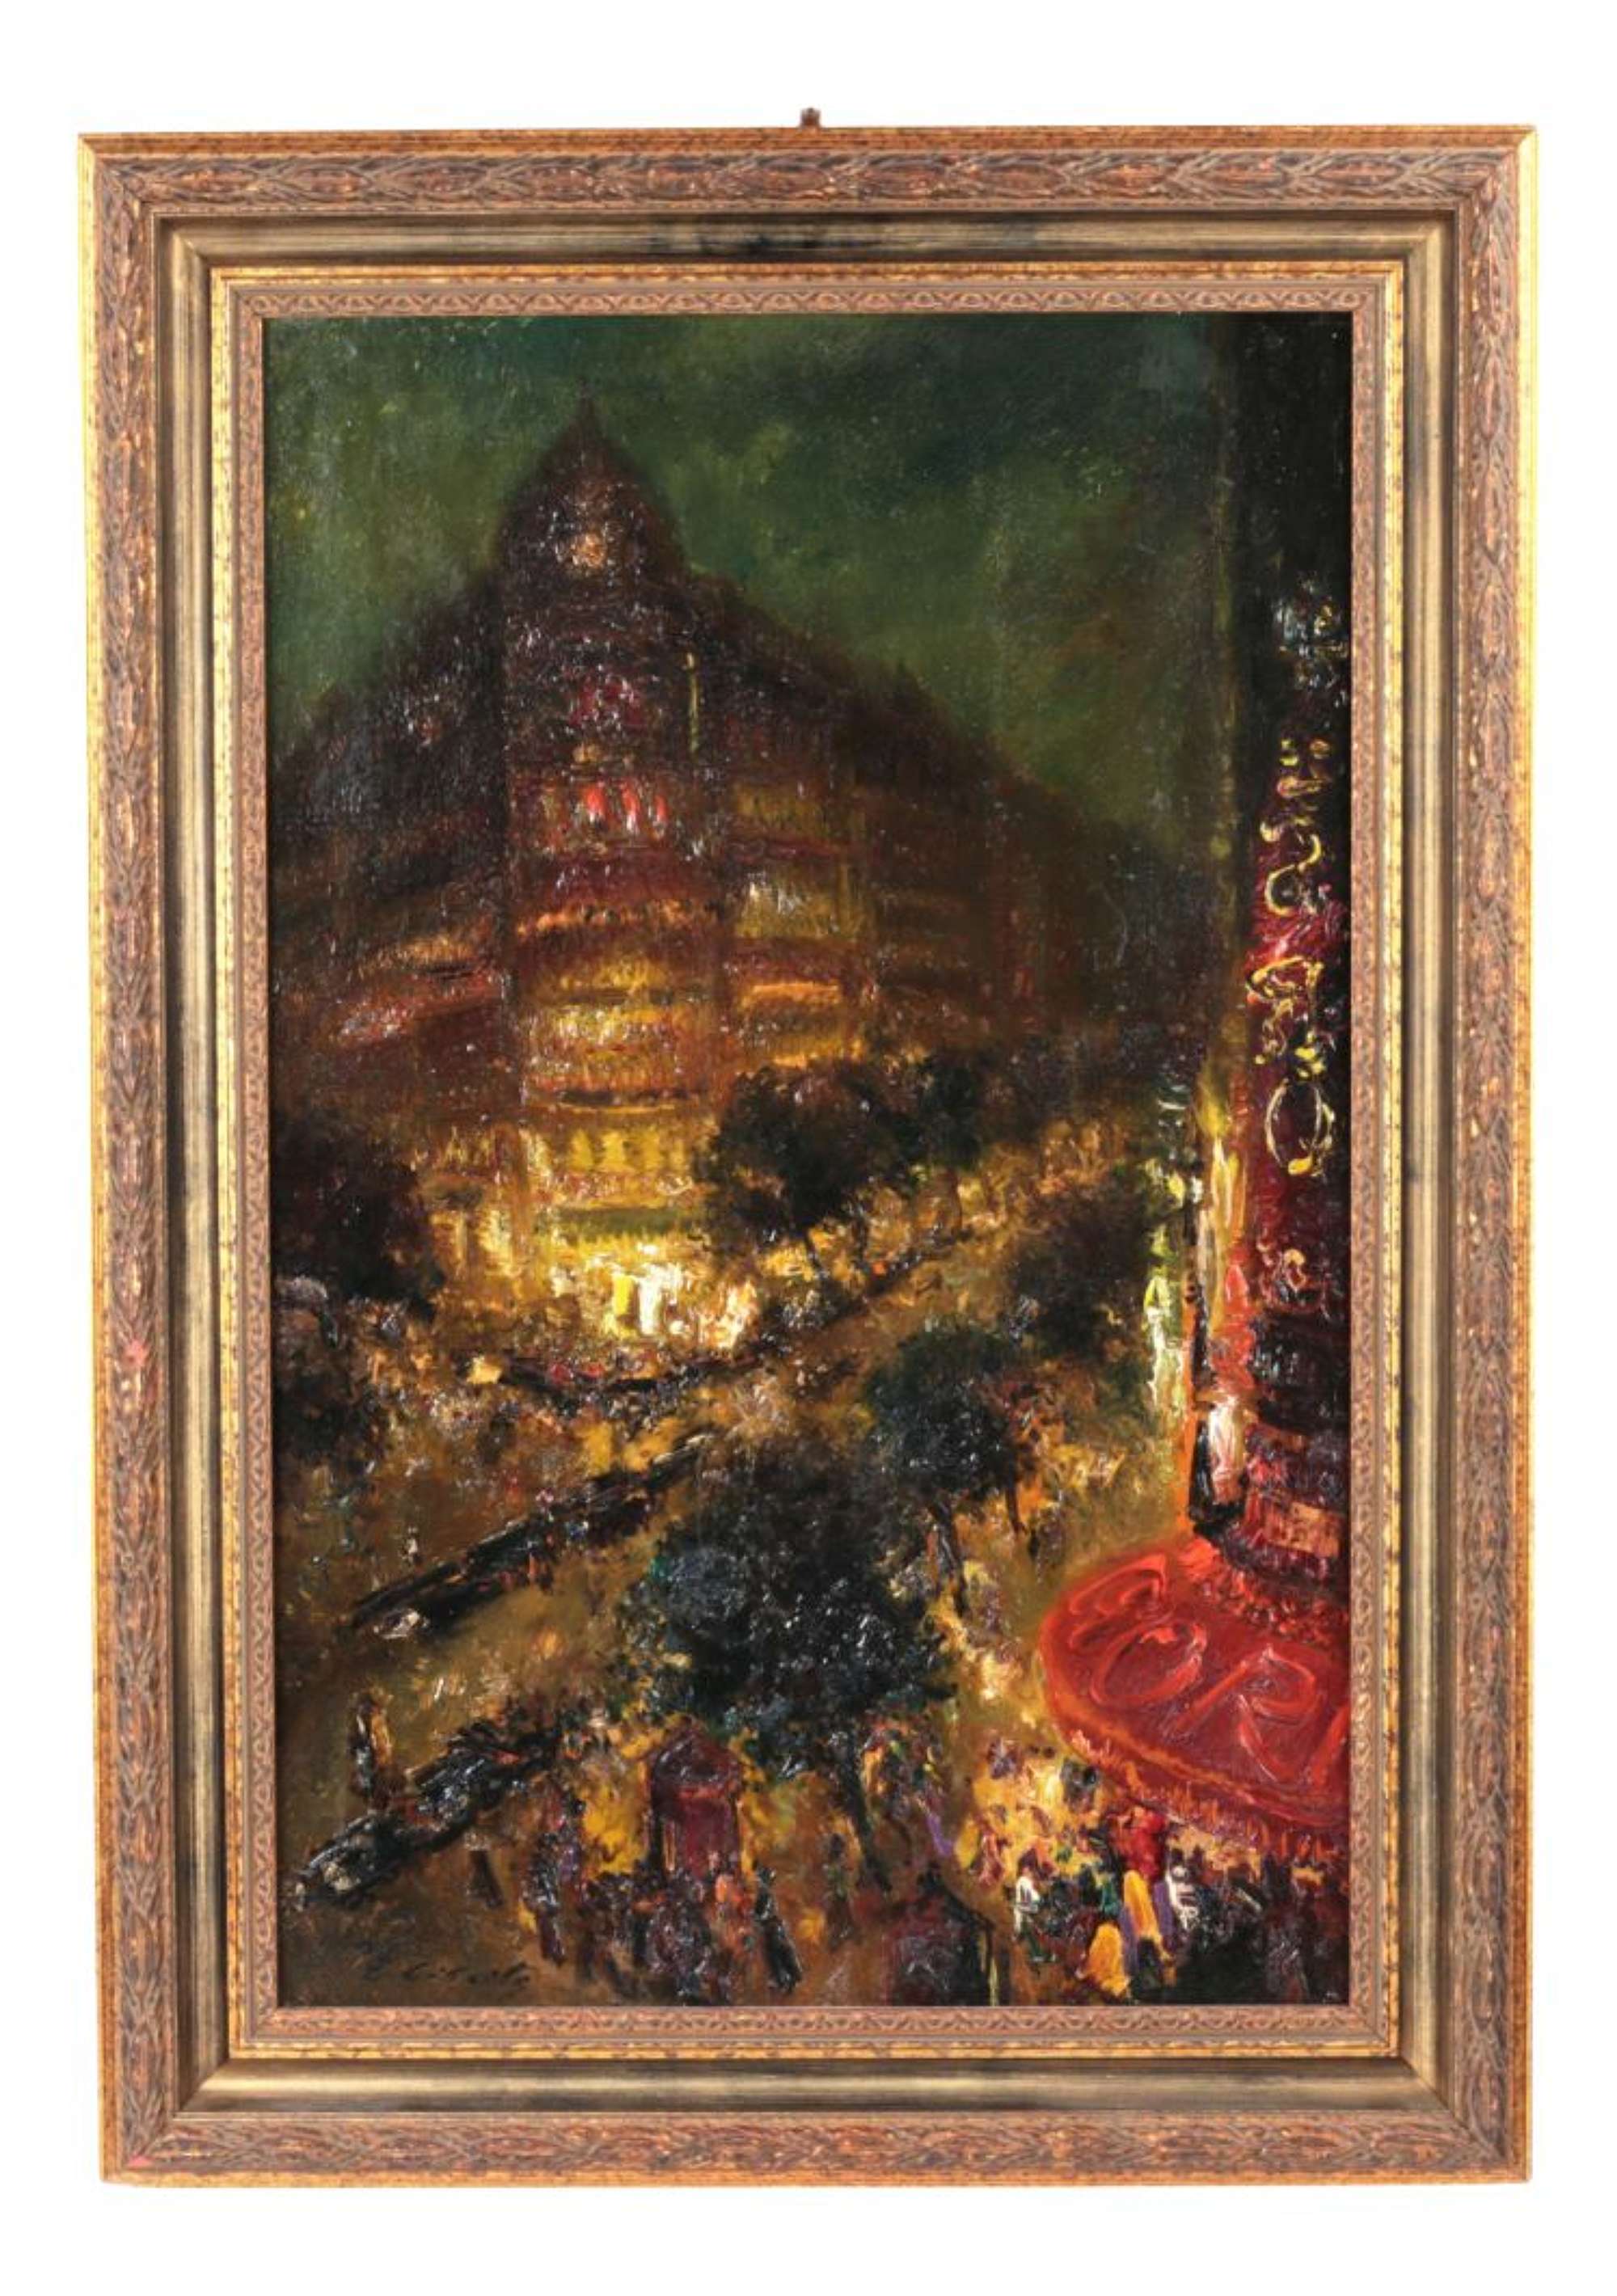 Ludolph Lieberts, Boulevard des Capucines, 20th Century, Oil on Cardboard, Framed